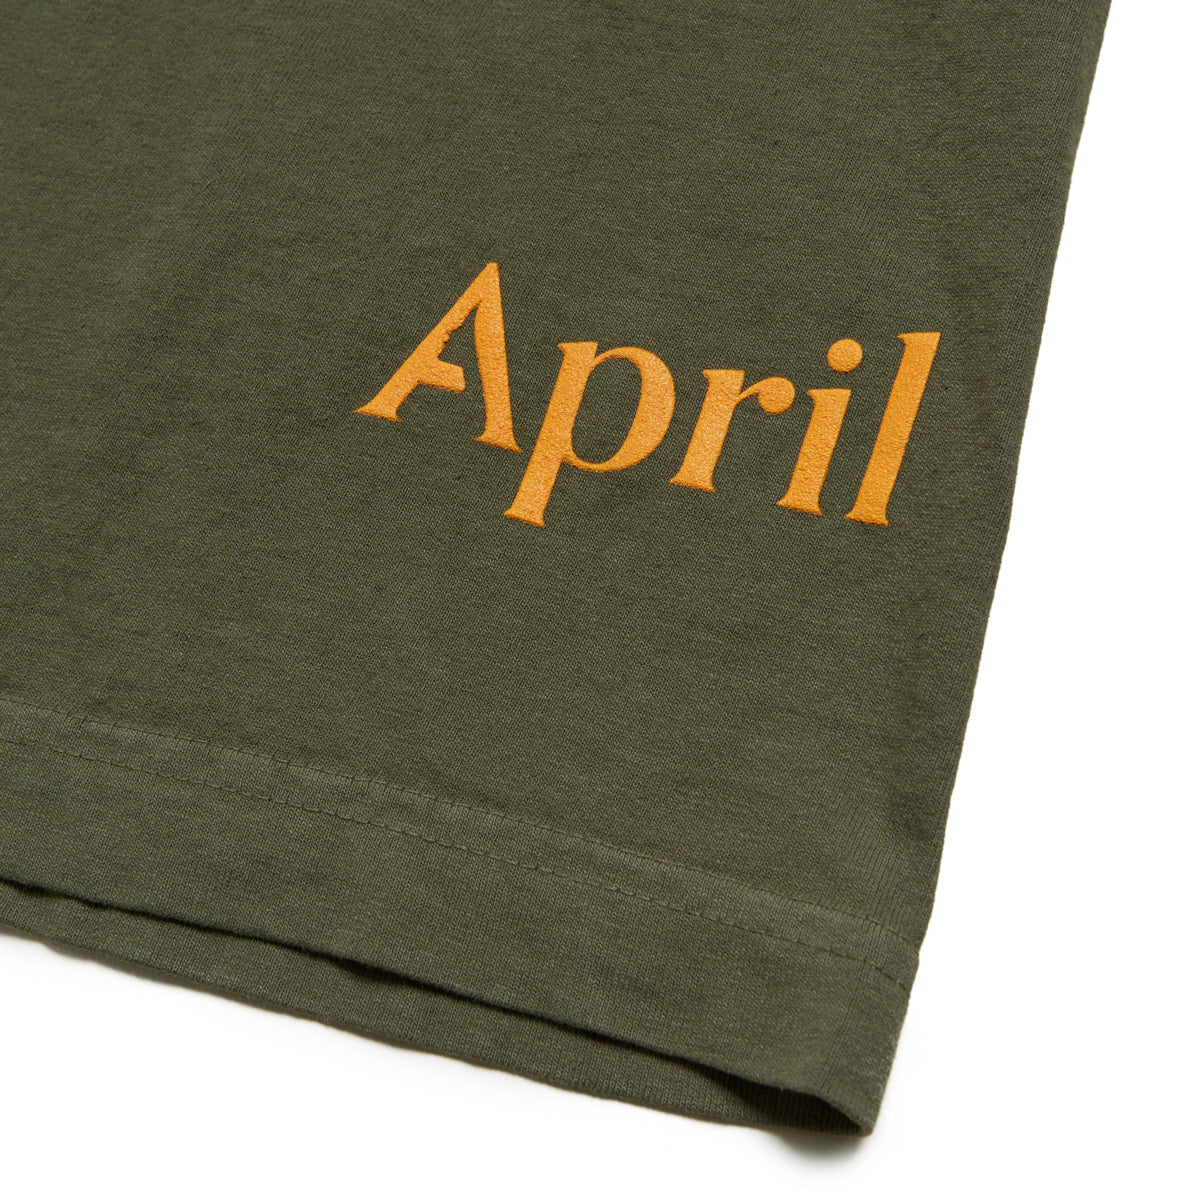 April The Face T-Shirt - Army Green image 3